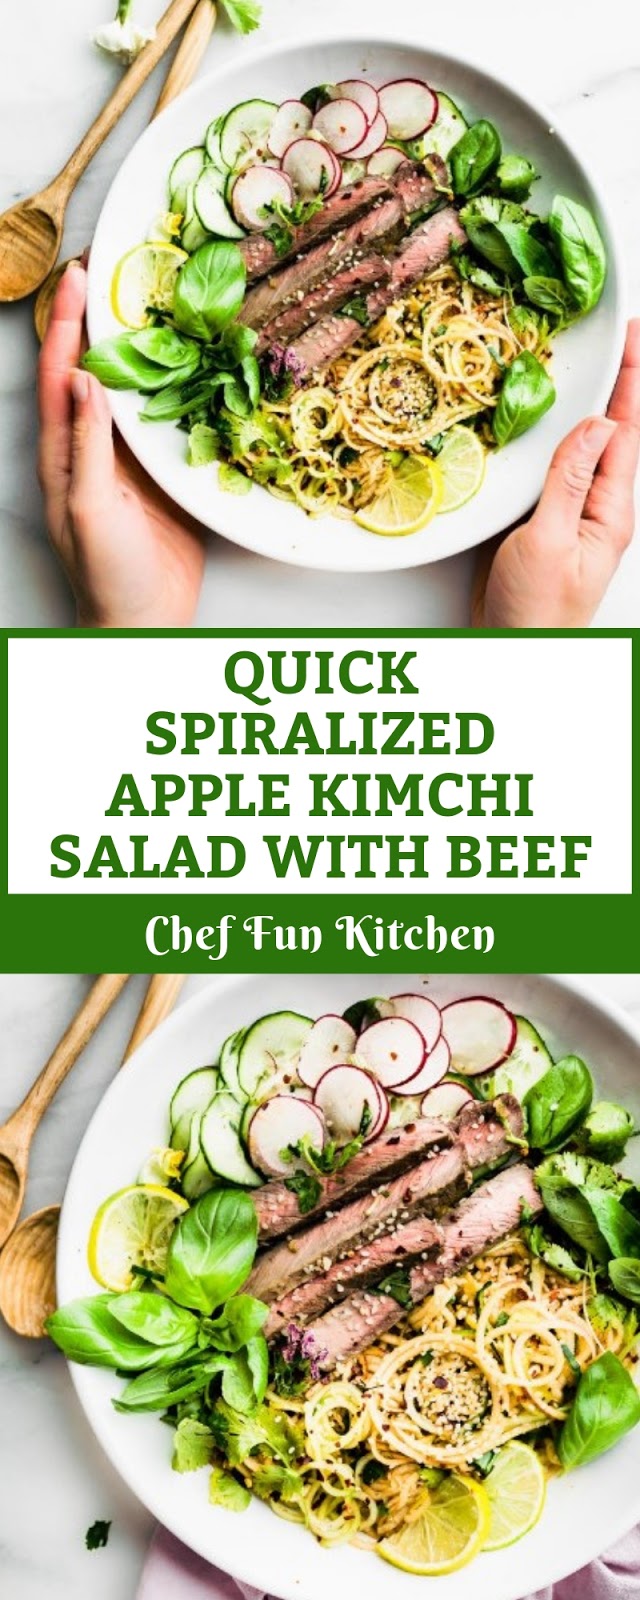 QUICK SPIRALIZED APPLE KIMCHI SALAD WITH BEEF